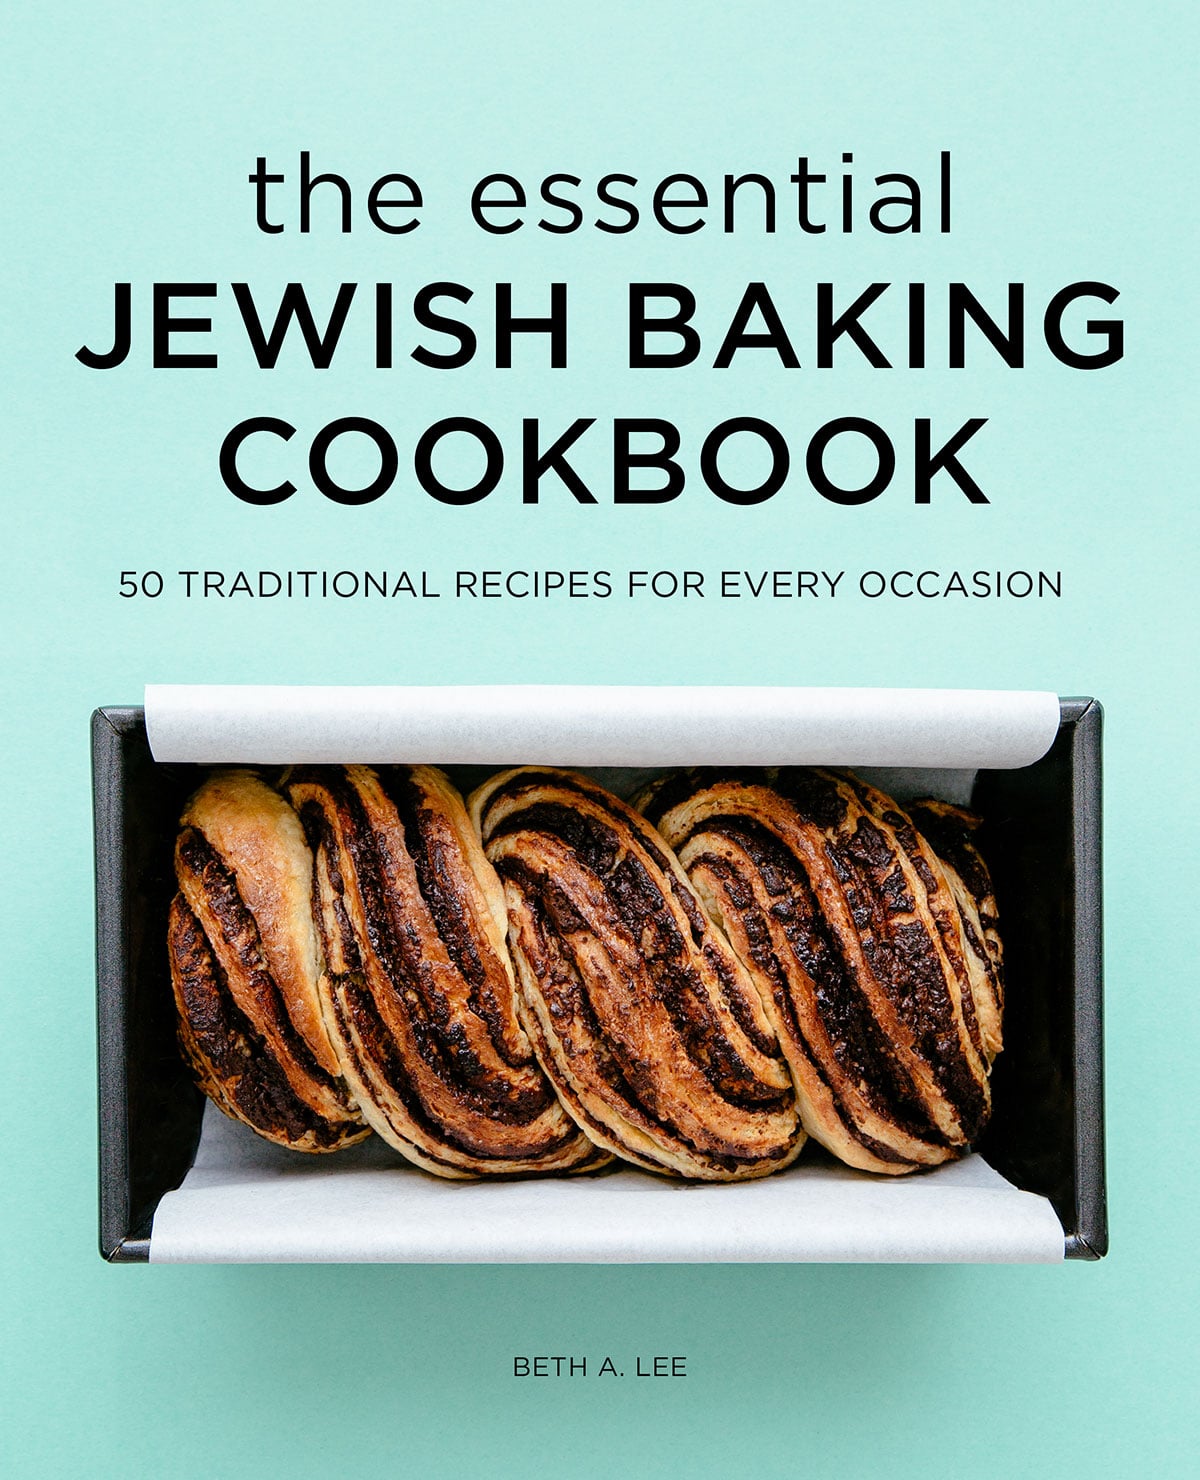 Cover photo of Essential Jewish Baking Cookbook by Beth A Lee.